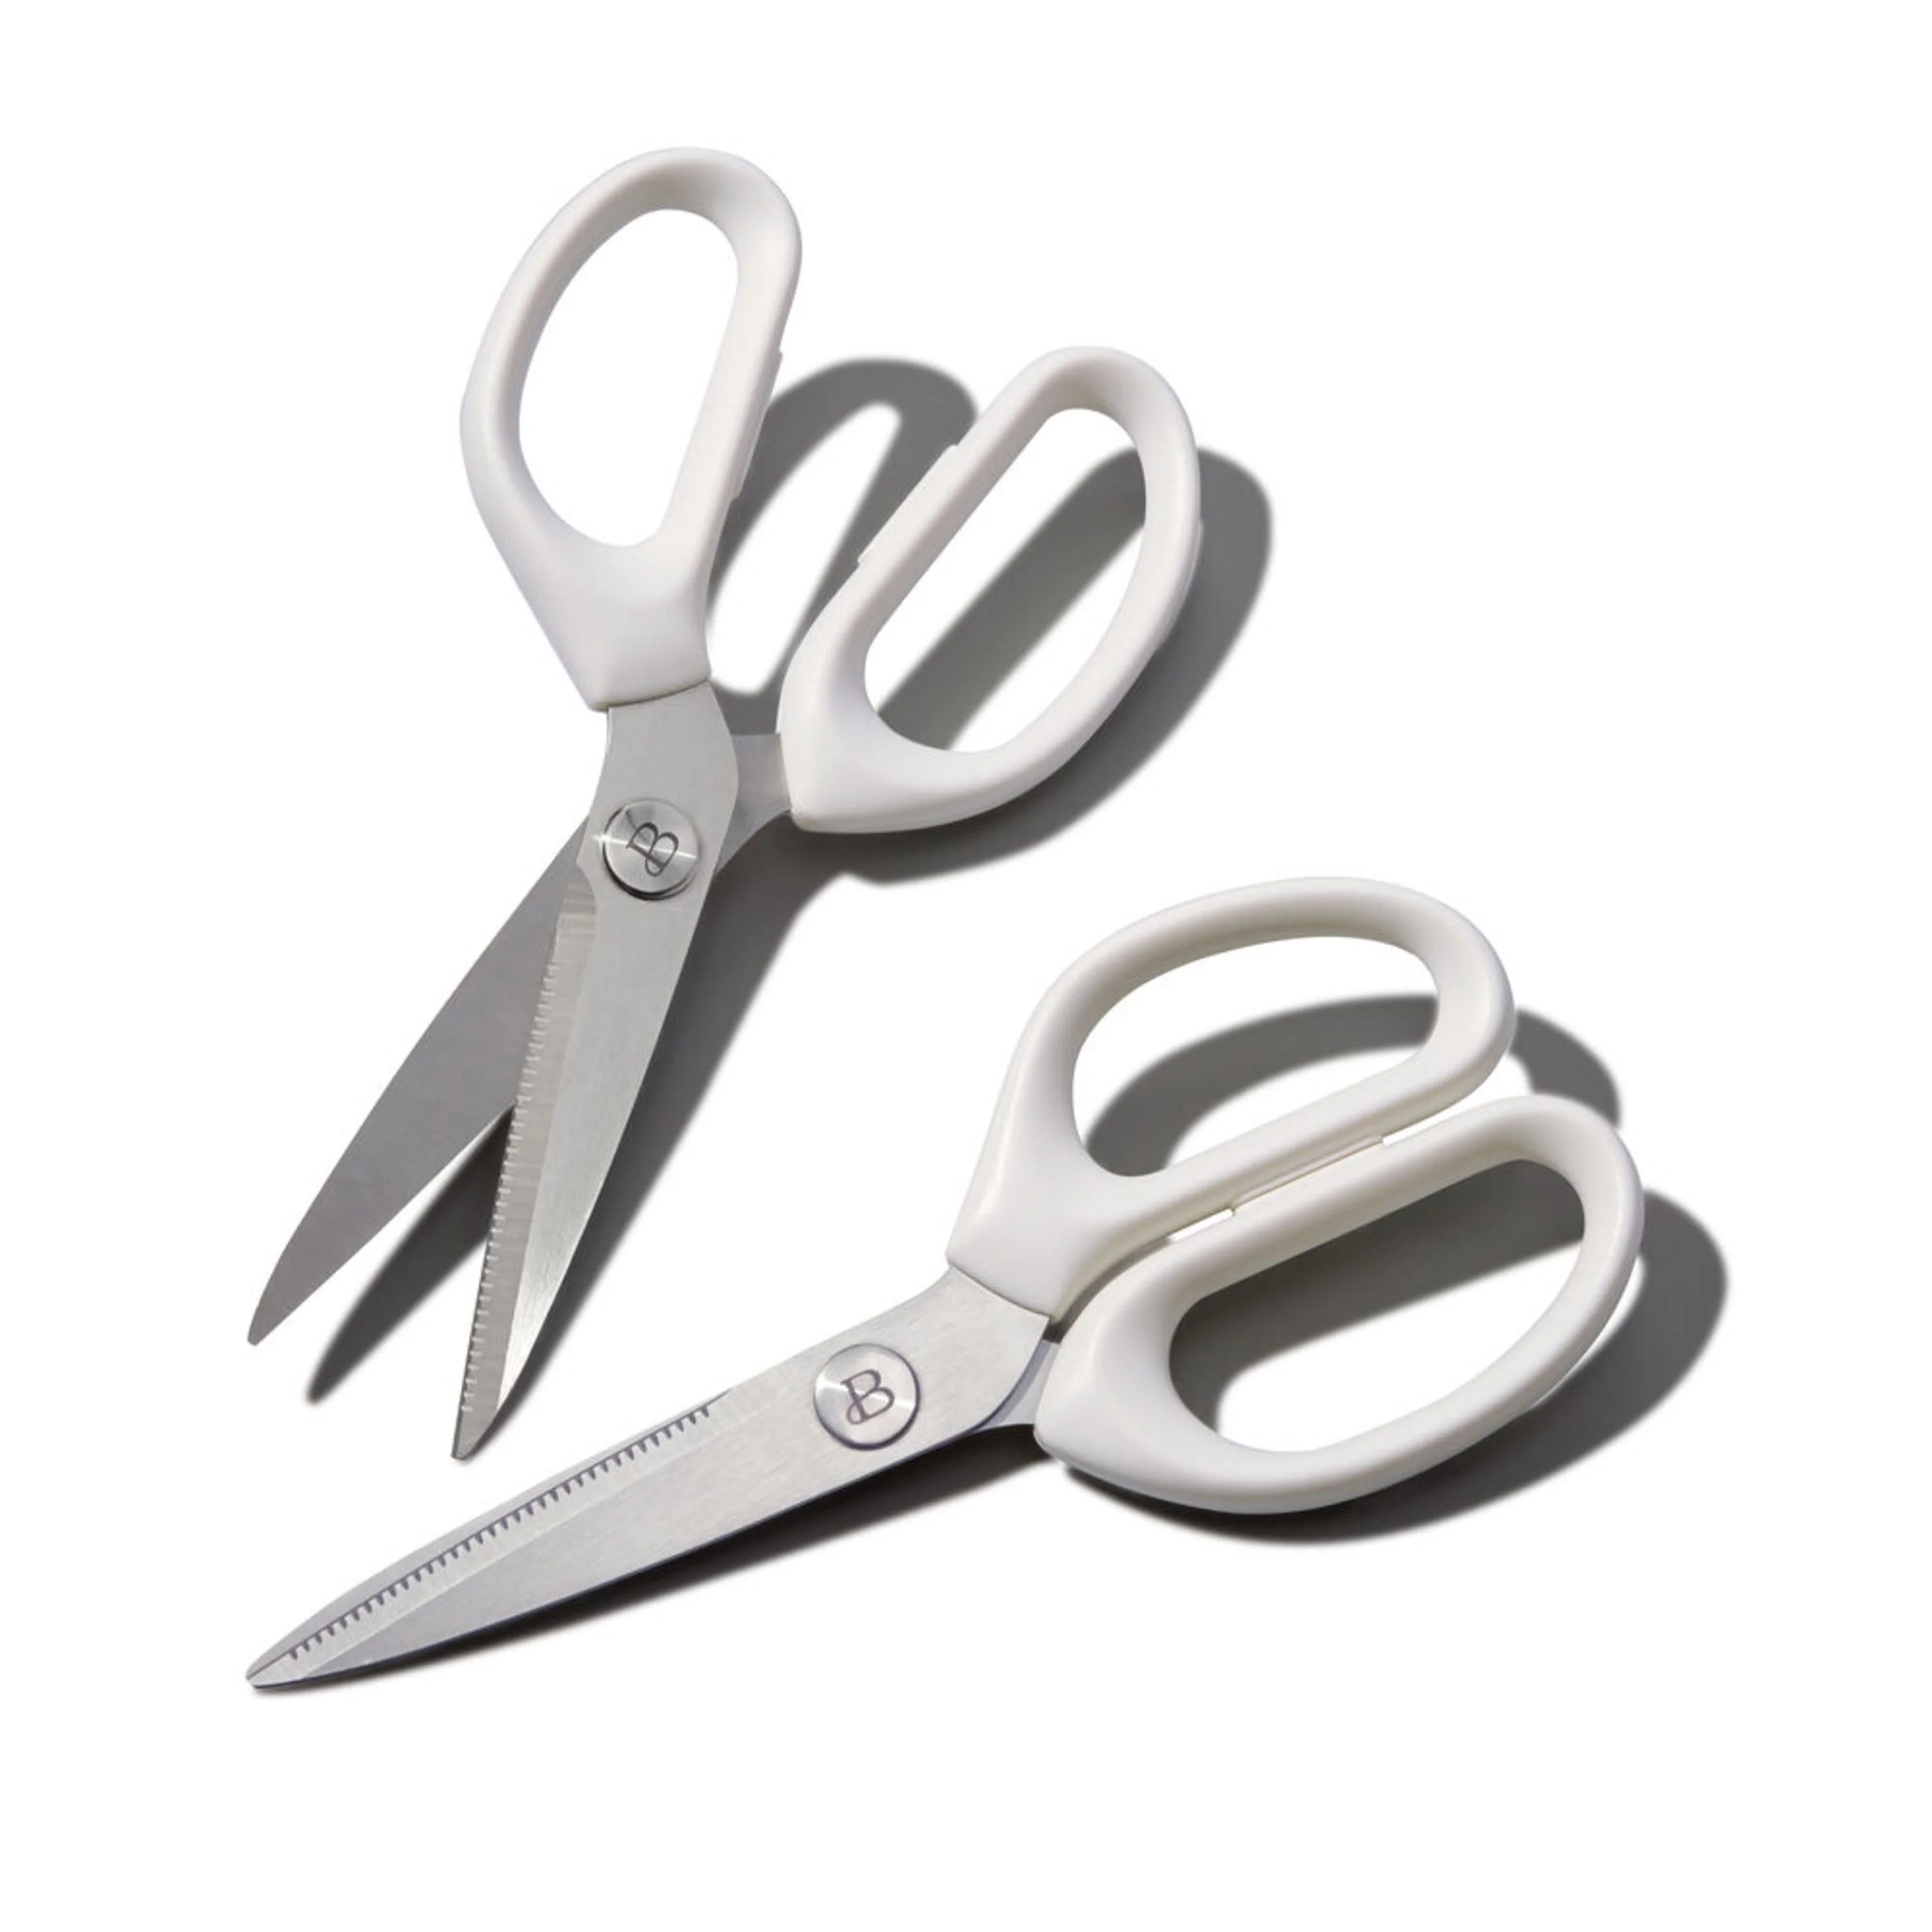 Beautiful 2-Piece All-Purpose Stainless Steel Shears in White | Walmart (US)